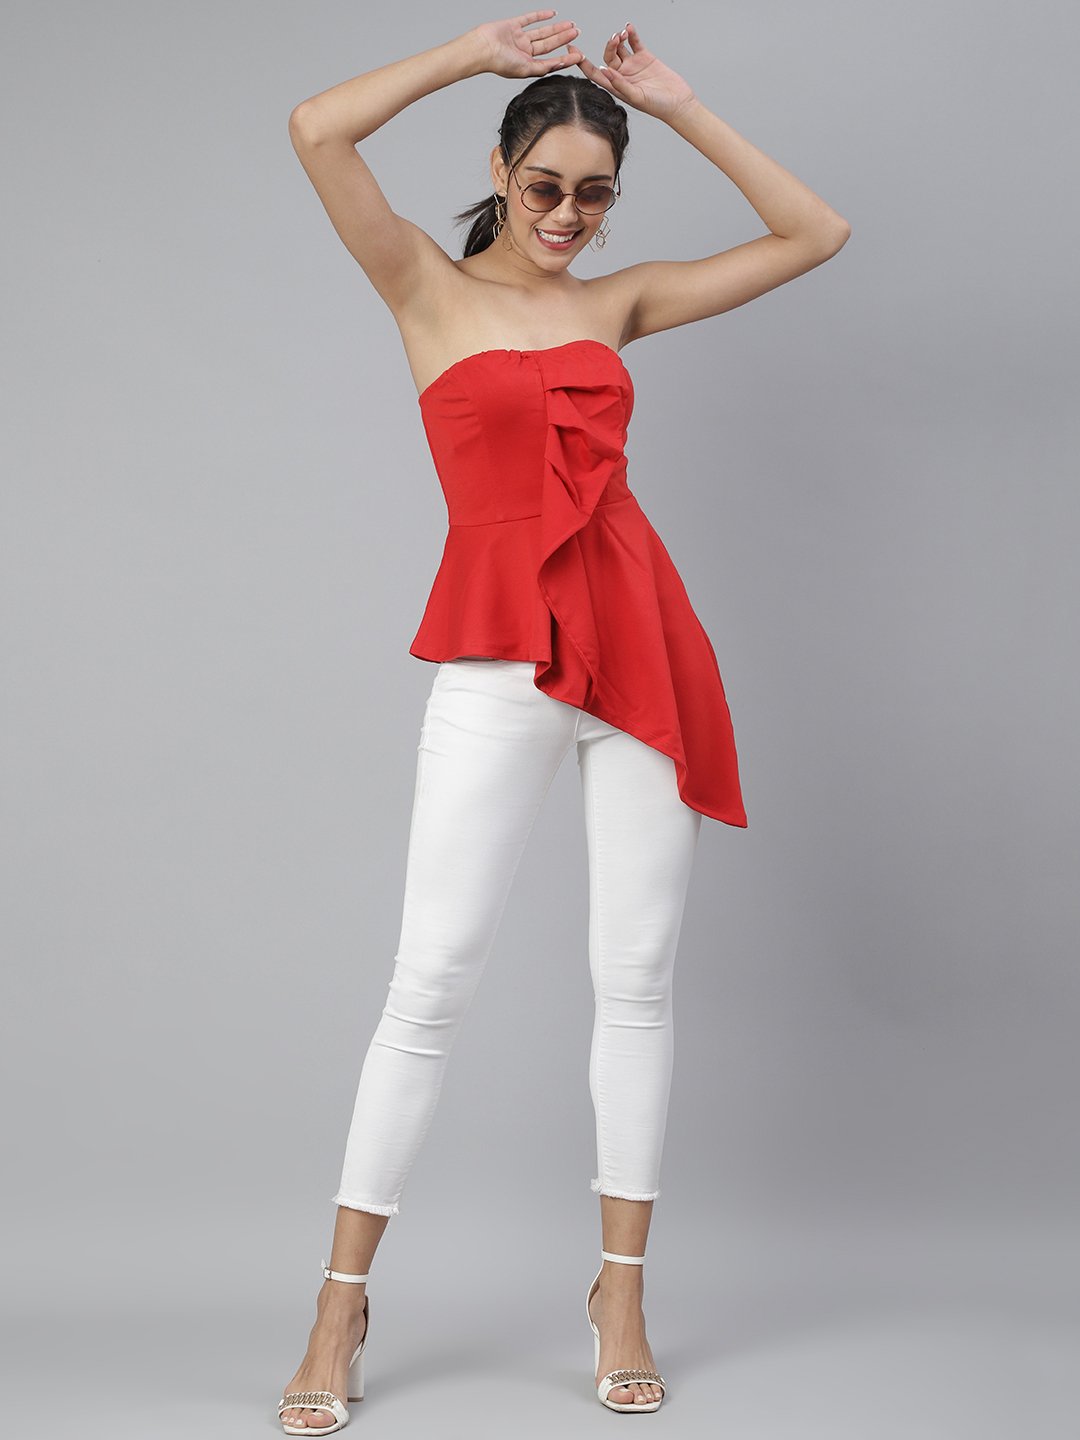 SCORPIUS Red offshoulder Top